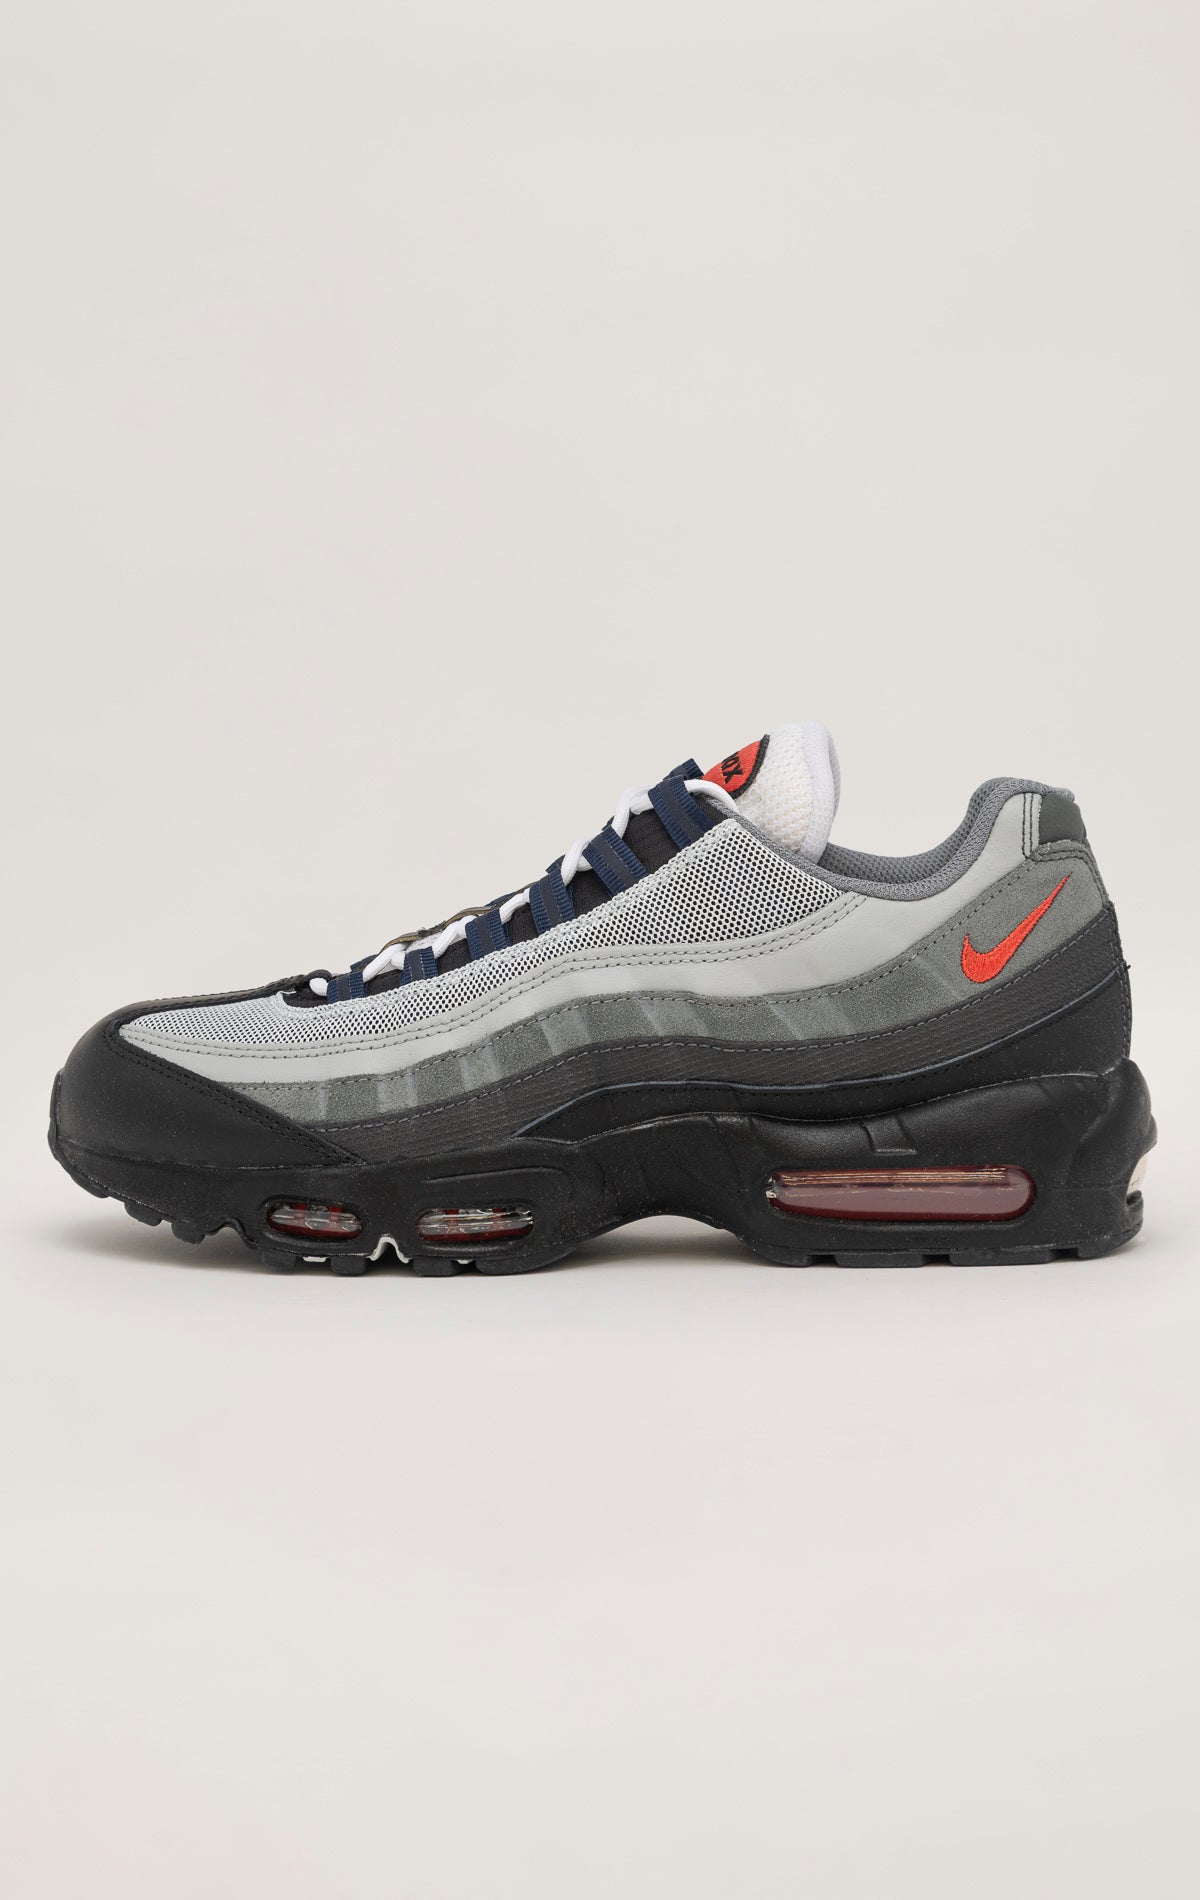 A black Nike Air Max 95 sneaker with a wavy mesh upper and visible Air cushioning units in the heel and forefoot. Anthracite and smoke grey accents contrast with pops of track red for a bold look.